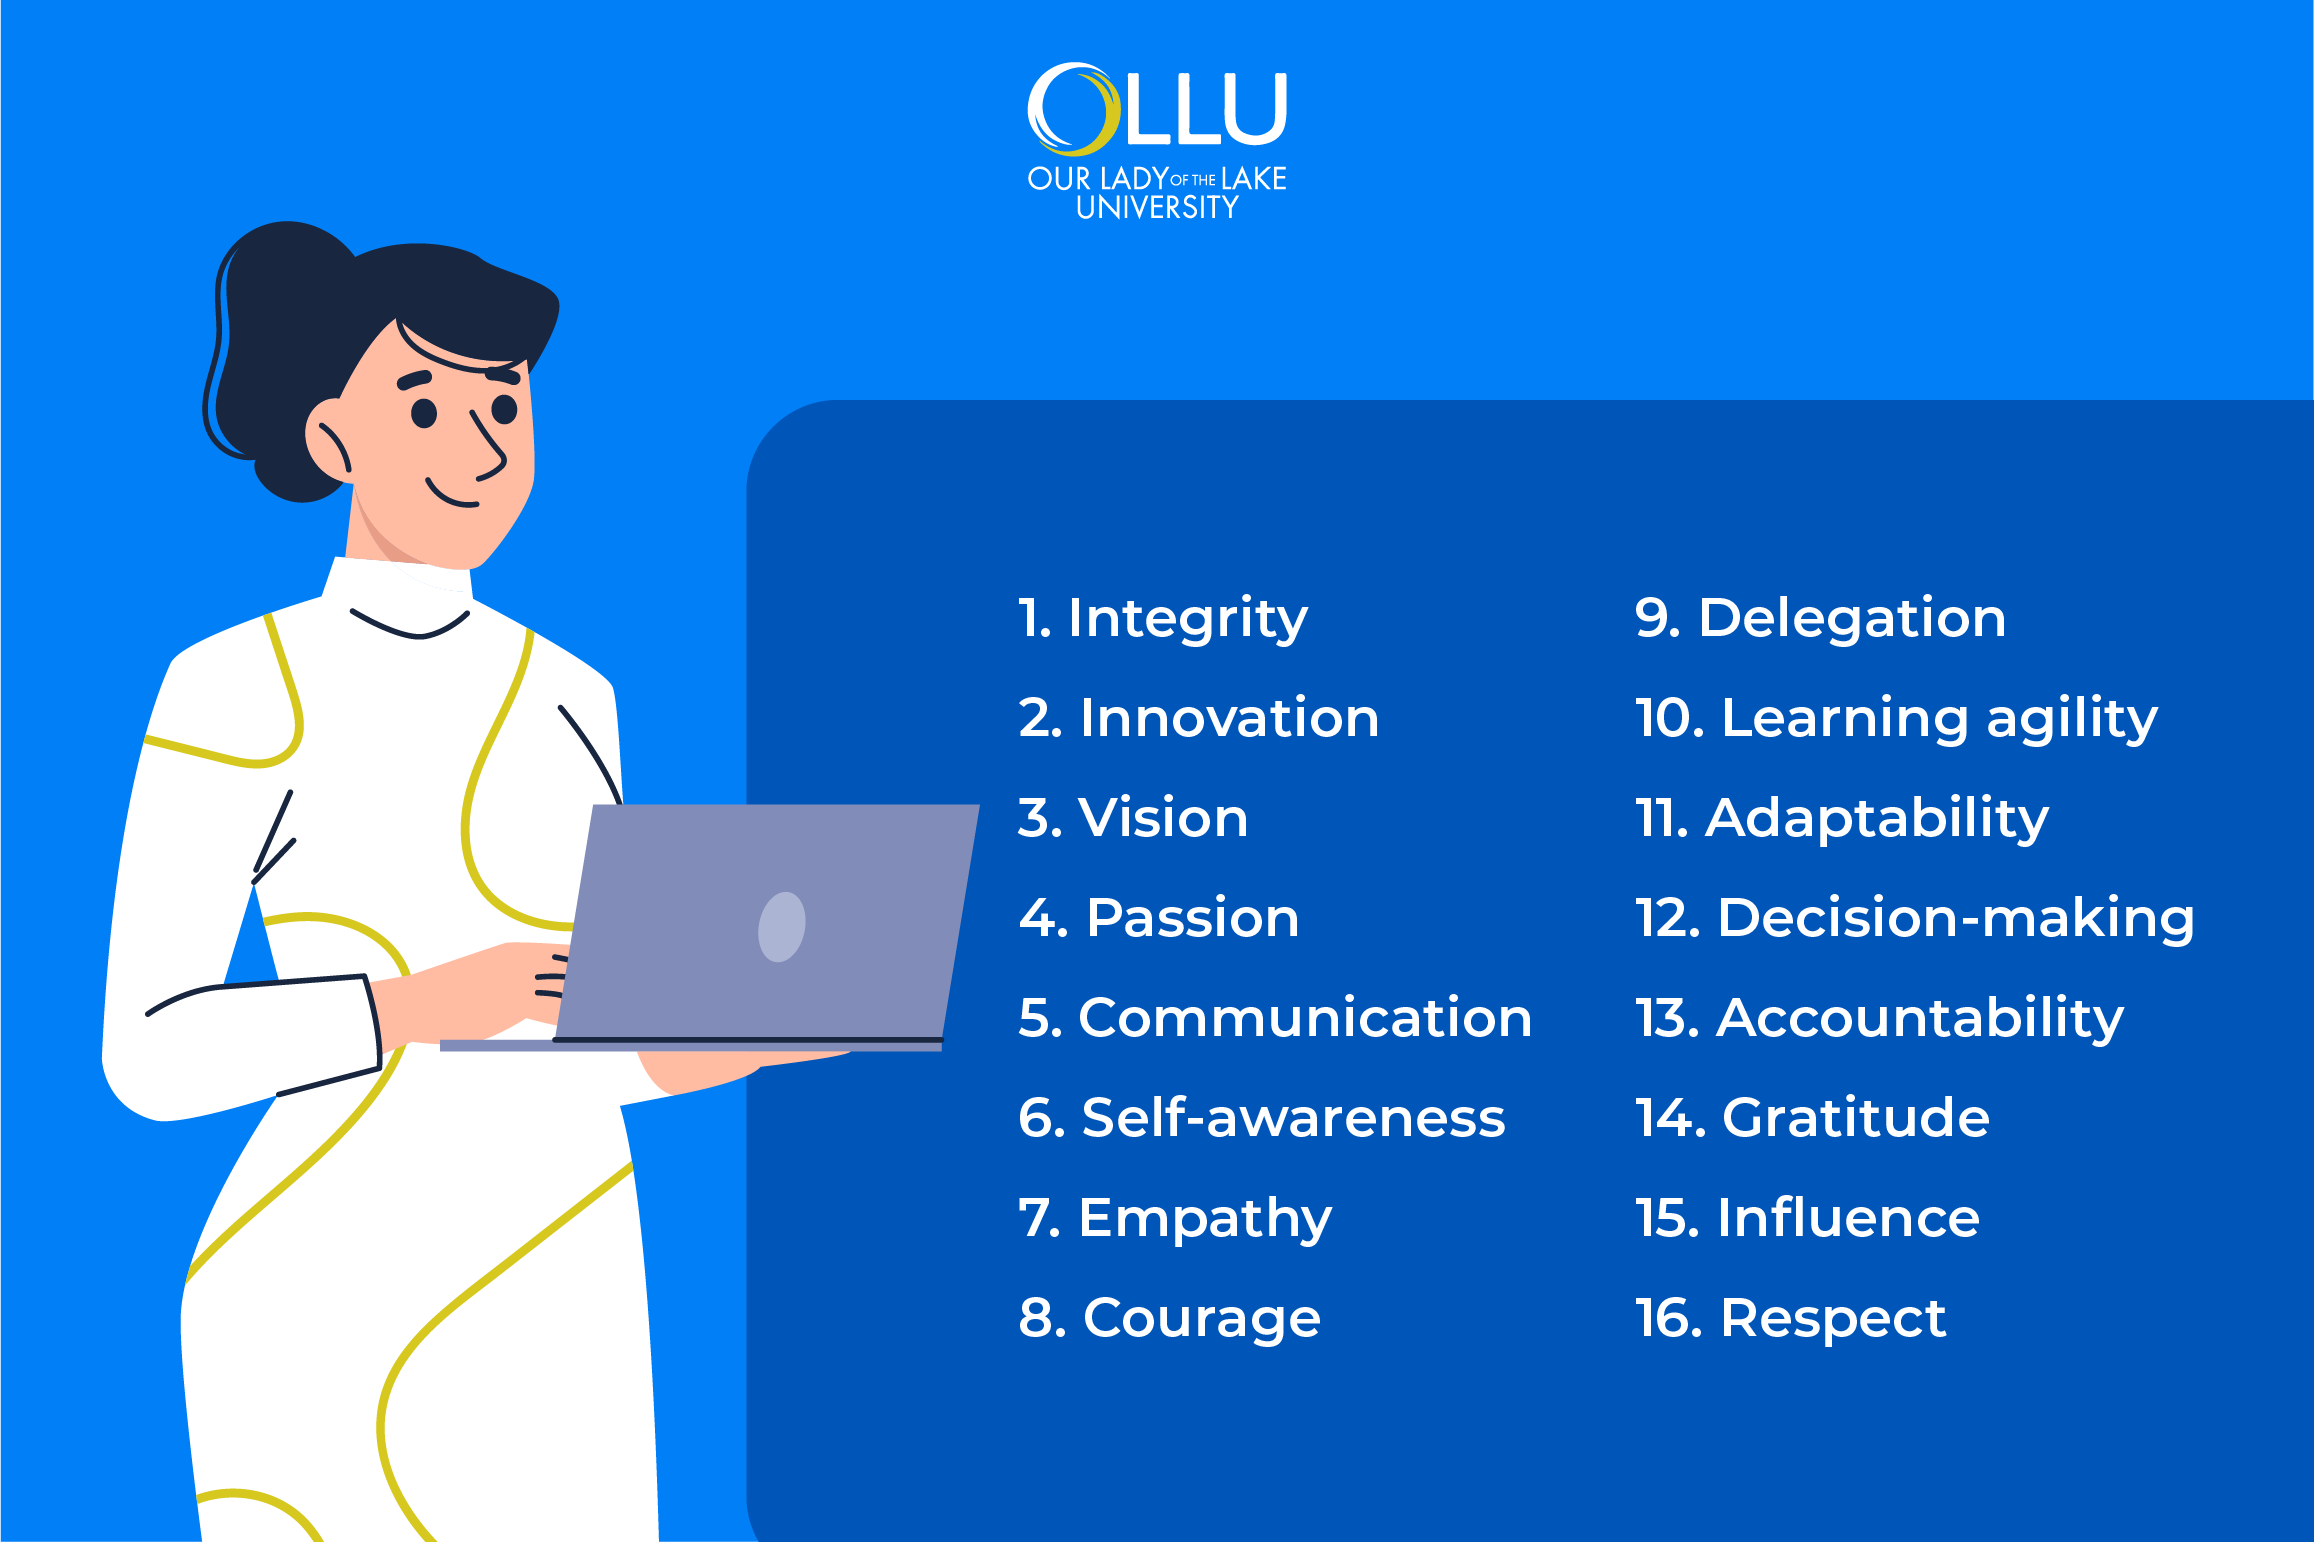 The 10 Characteristics and Qualities of a Good Leader